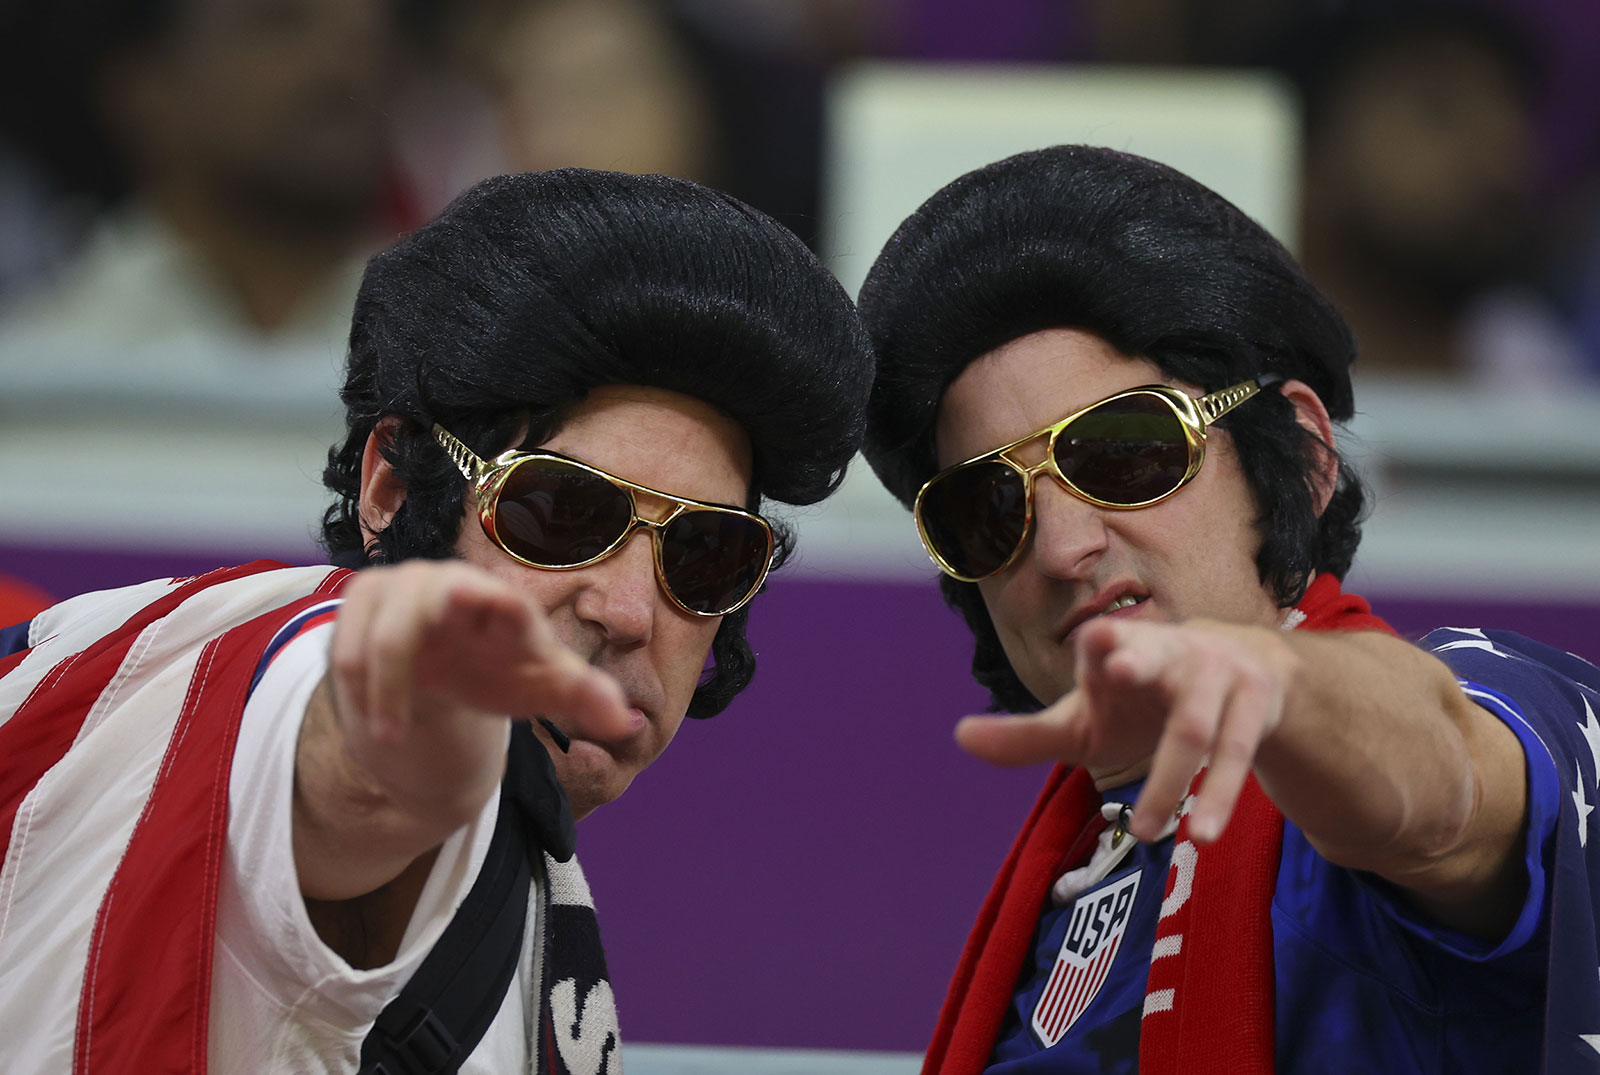 Two Elvis-themed fans are seen prior to the match between USA and Wales on November 21.